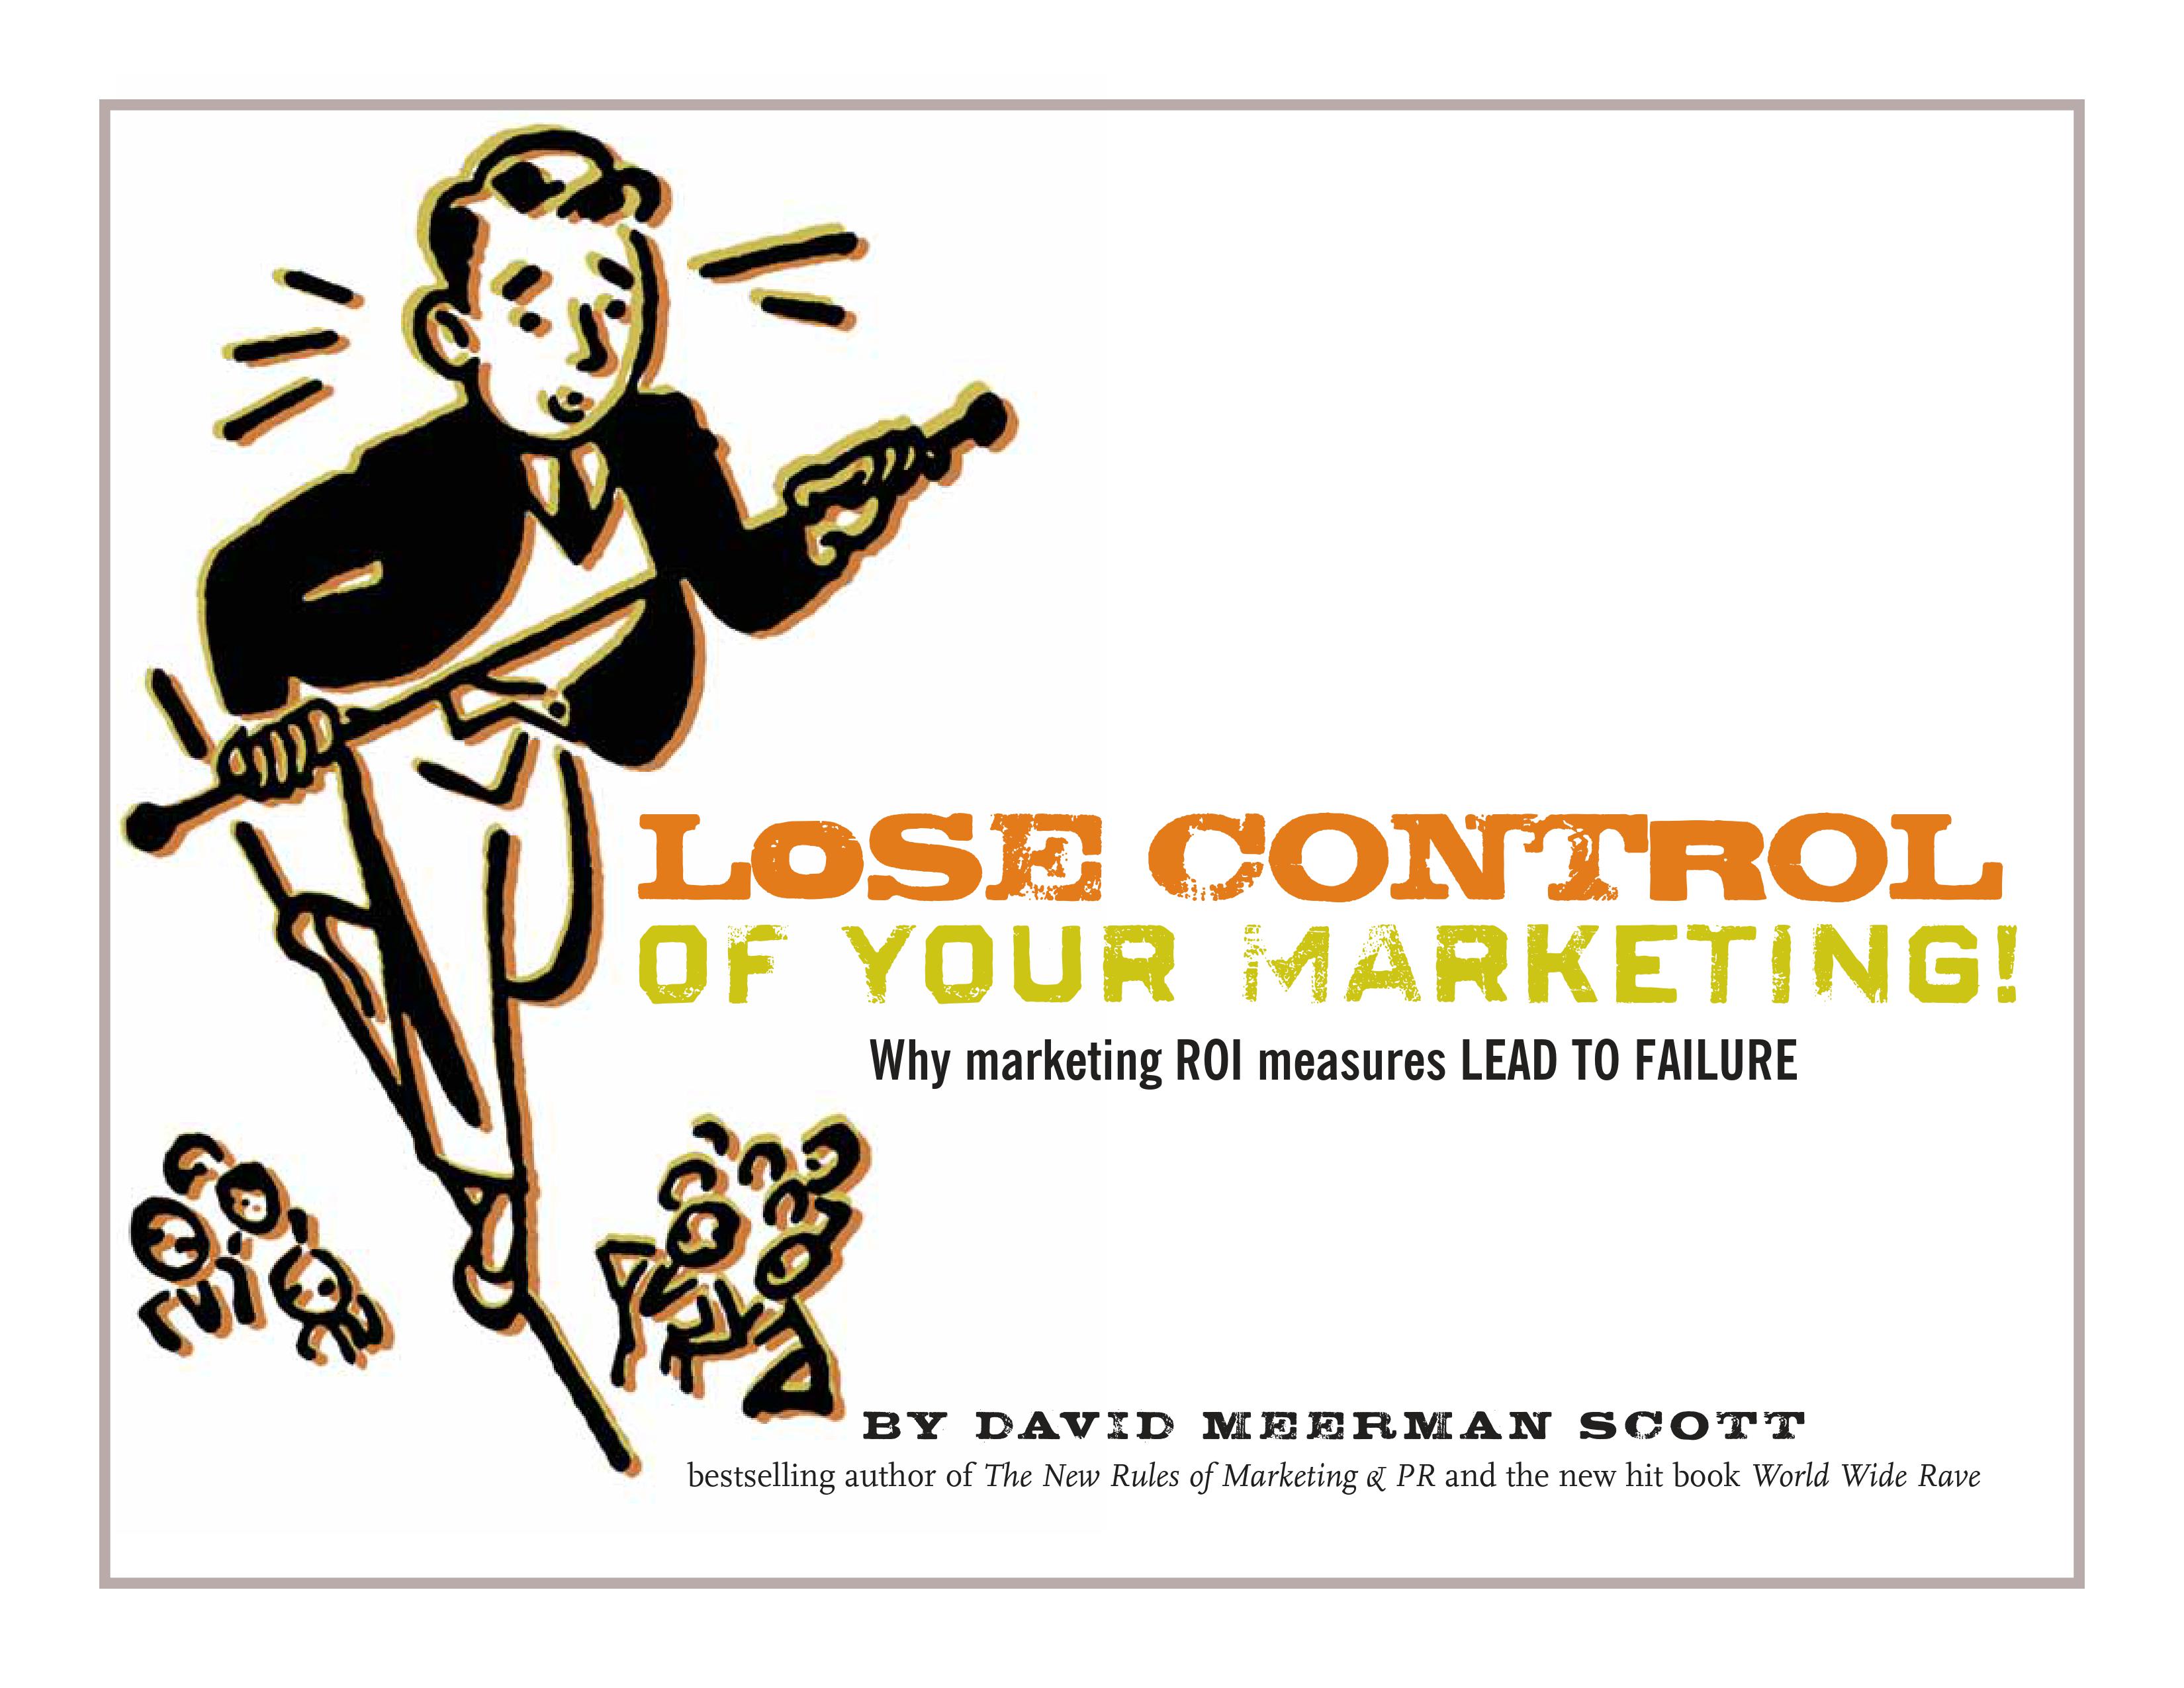 Loose-control-of-your-marketing